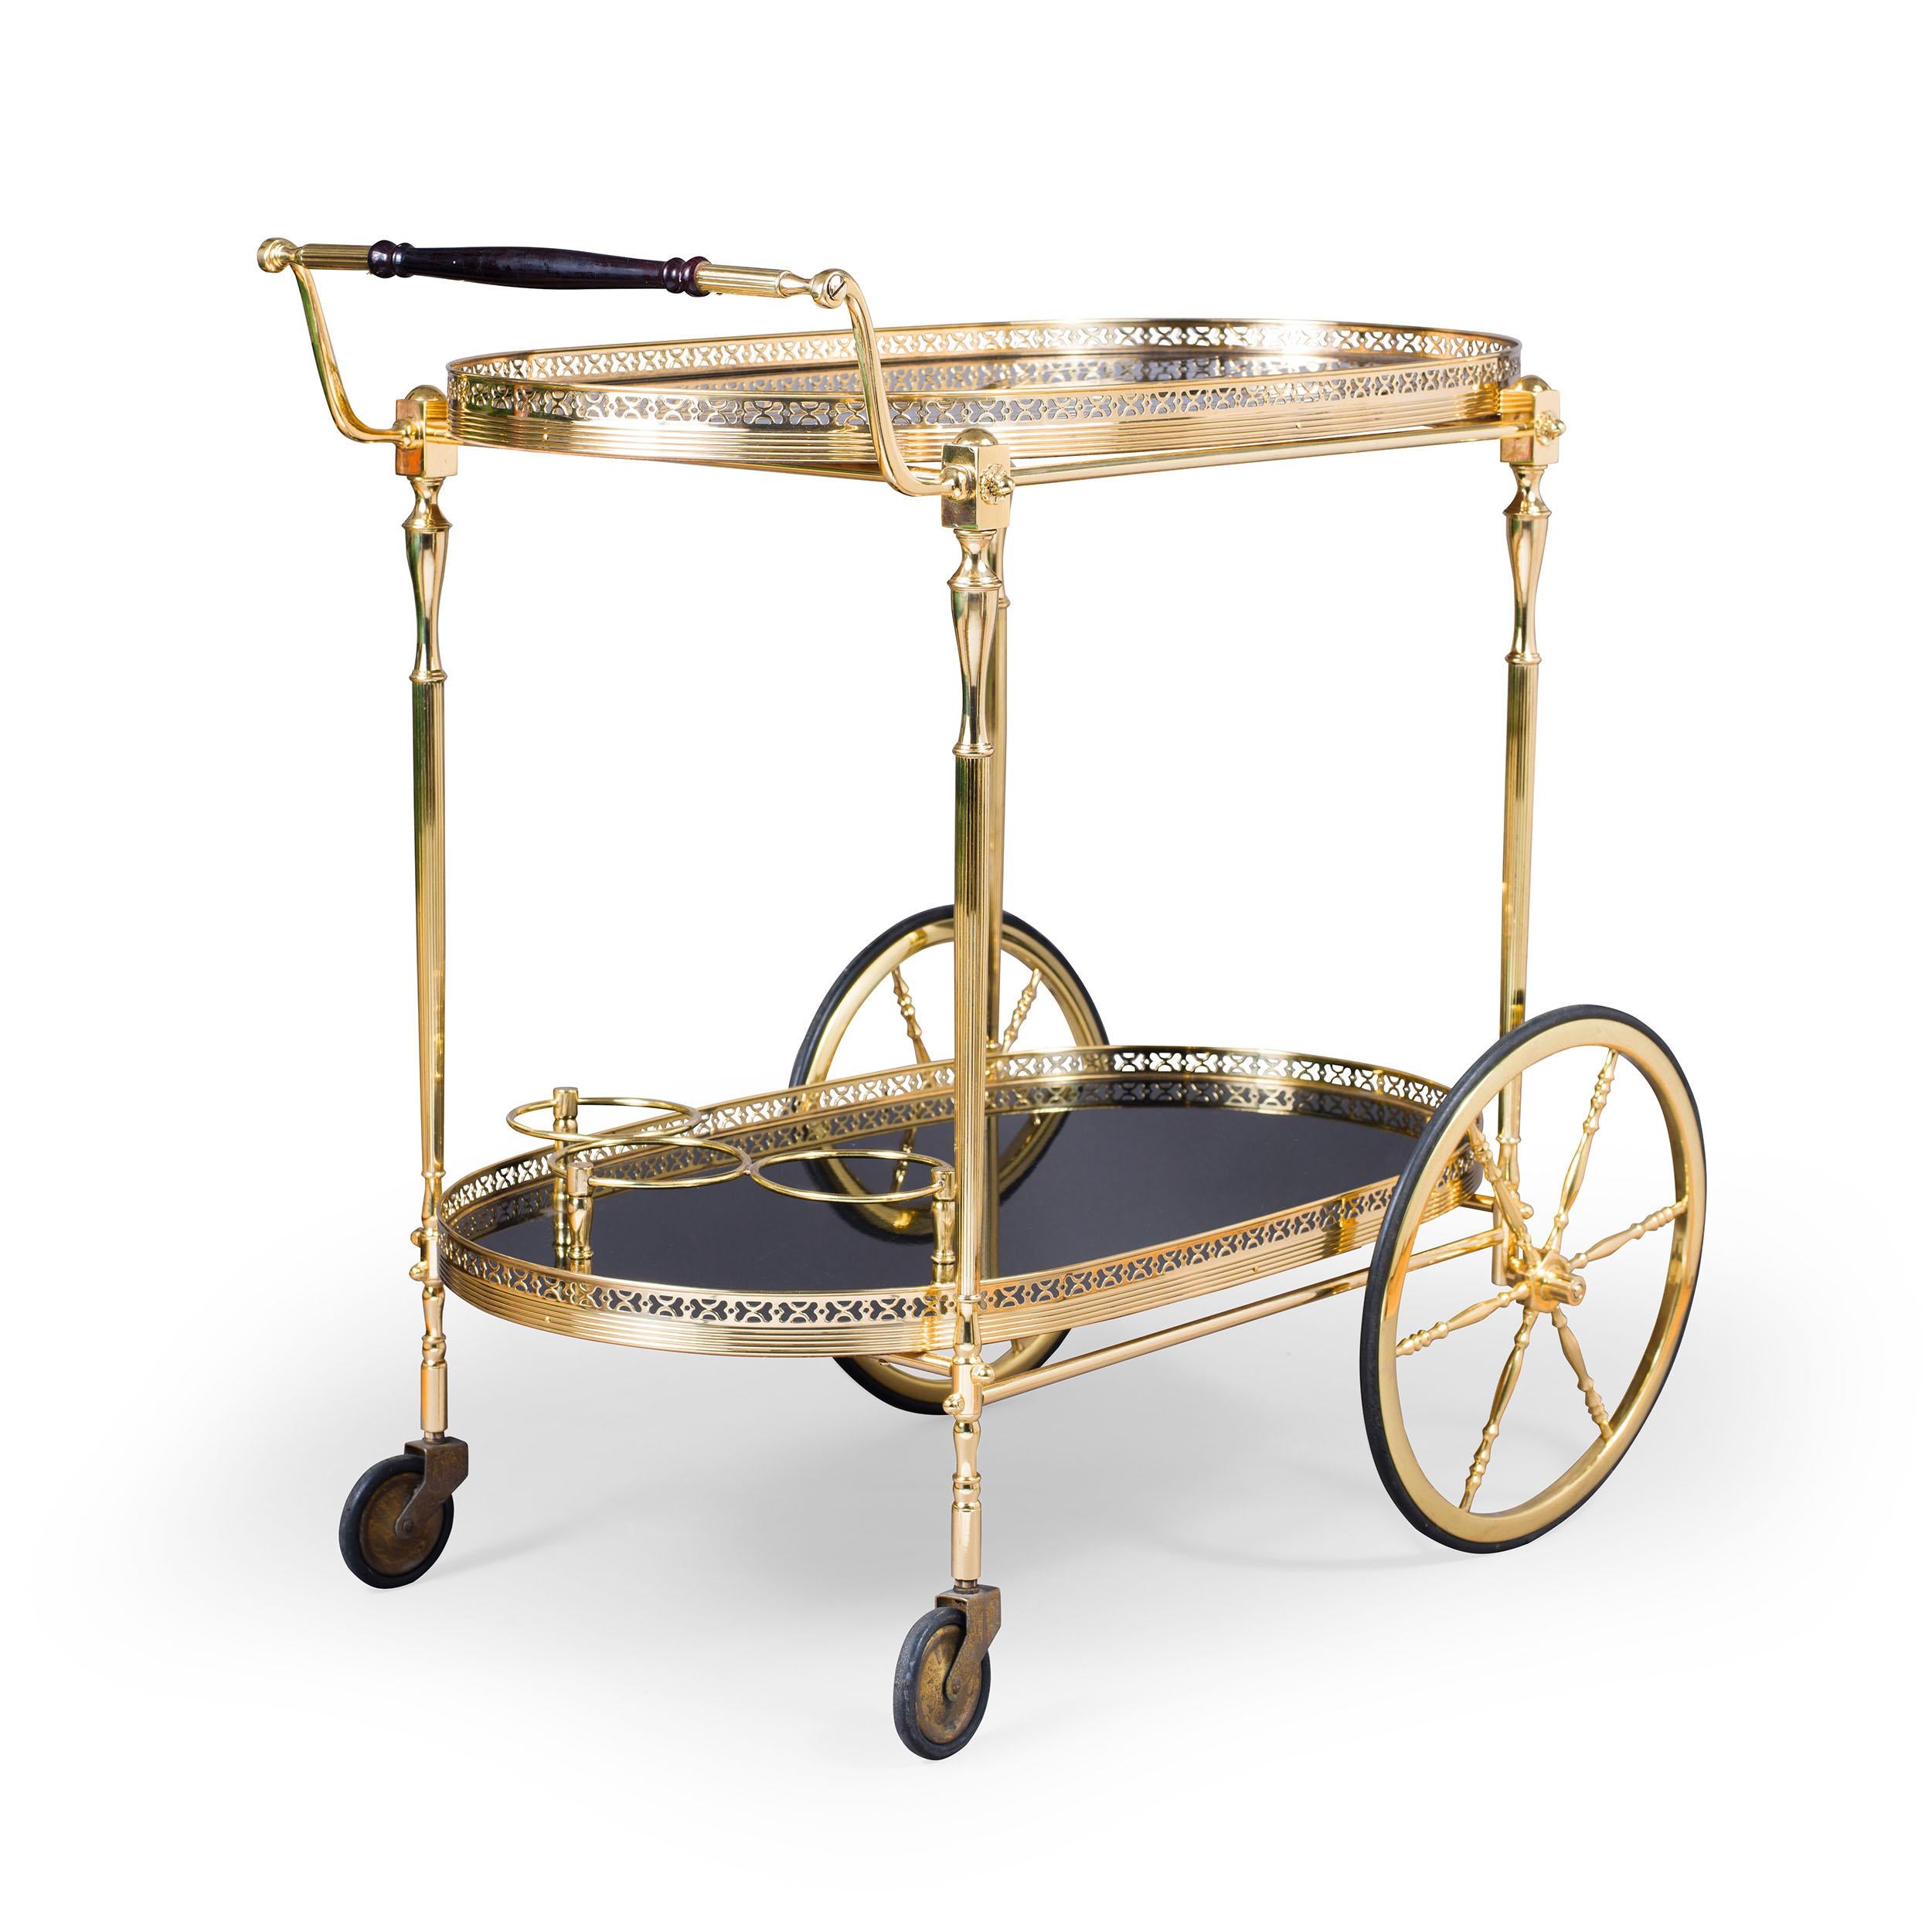 An elegant mid-century drinks trolley with two oval tiers, both with lacquered black surfaces, framed with pierced brass galleries, and supported on turned brass legs with cast brass decorative details applied. Large turned brass wheels at the